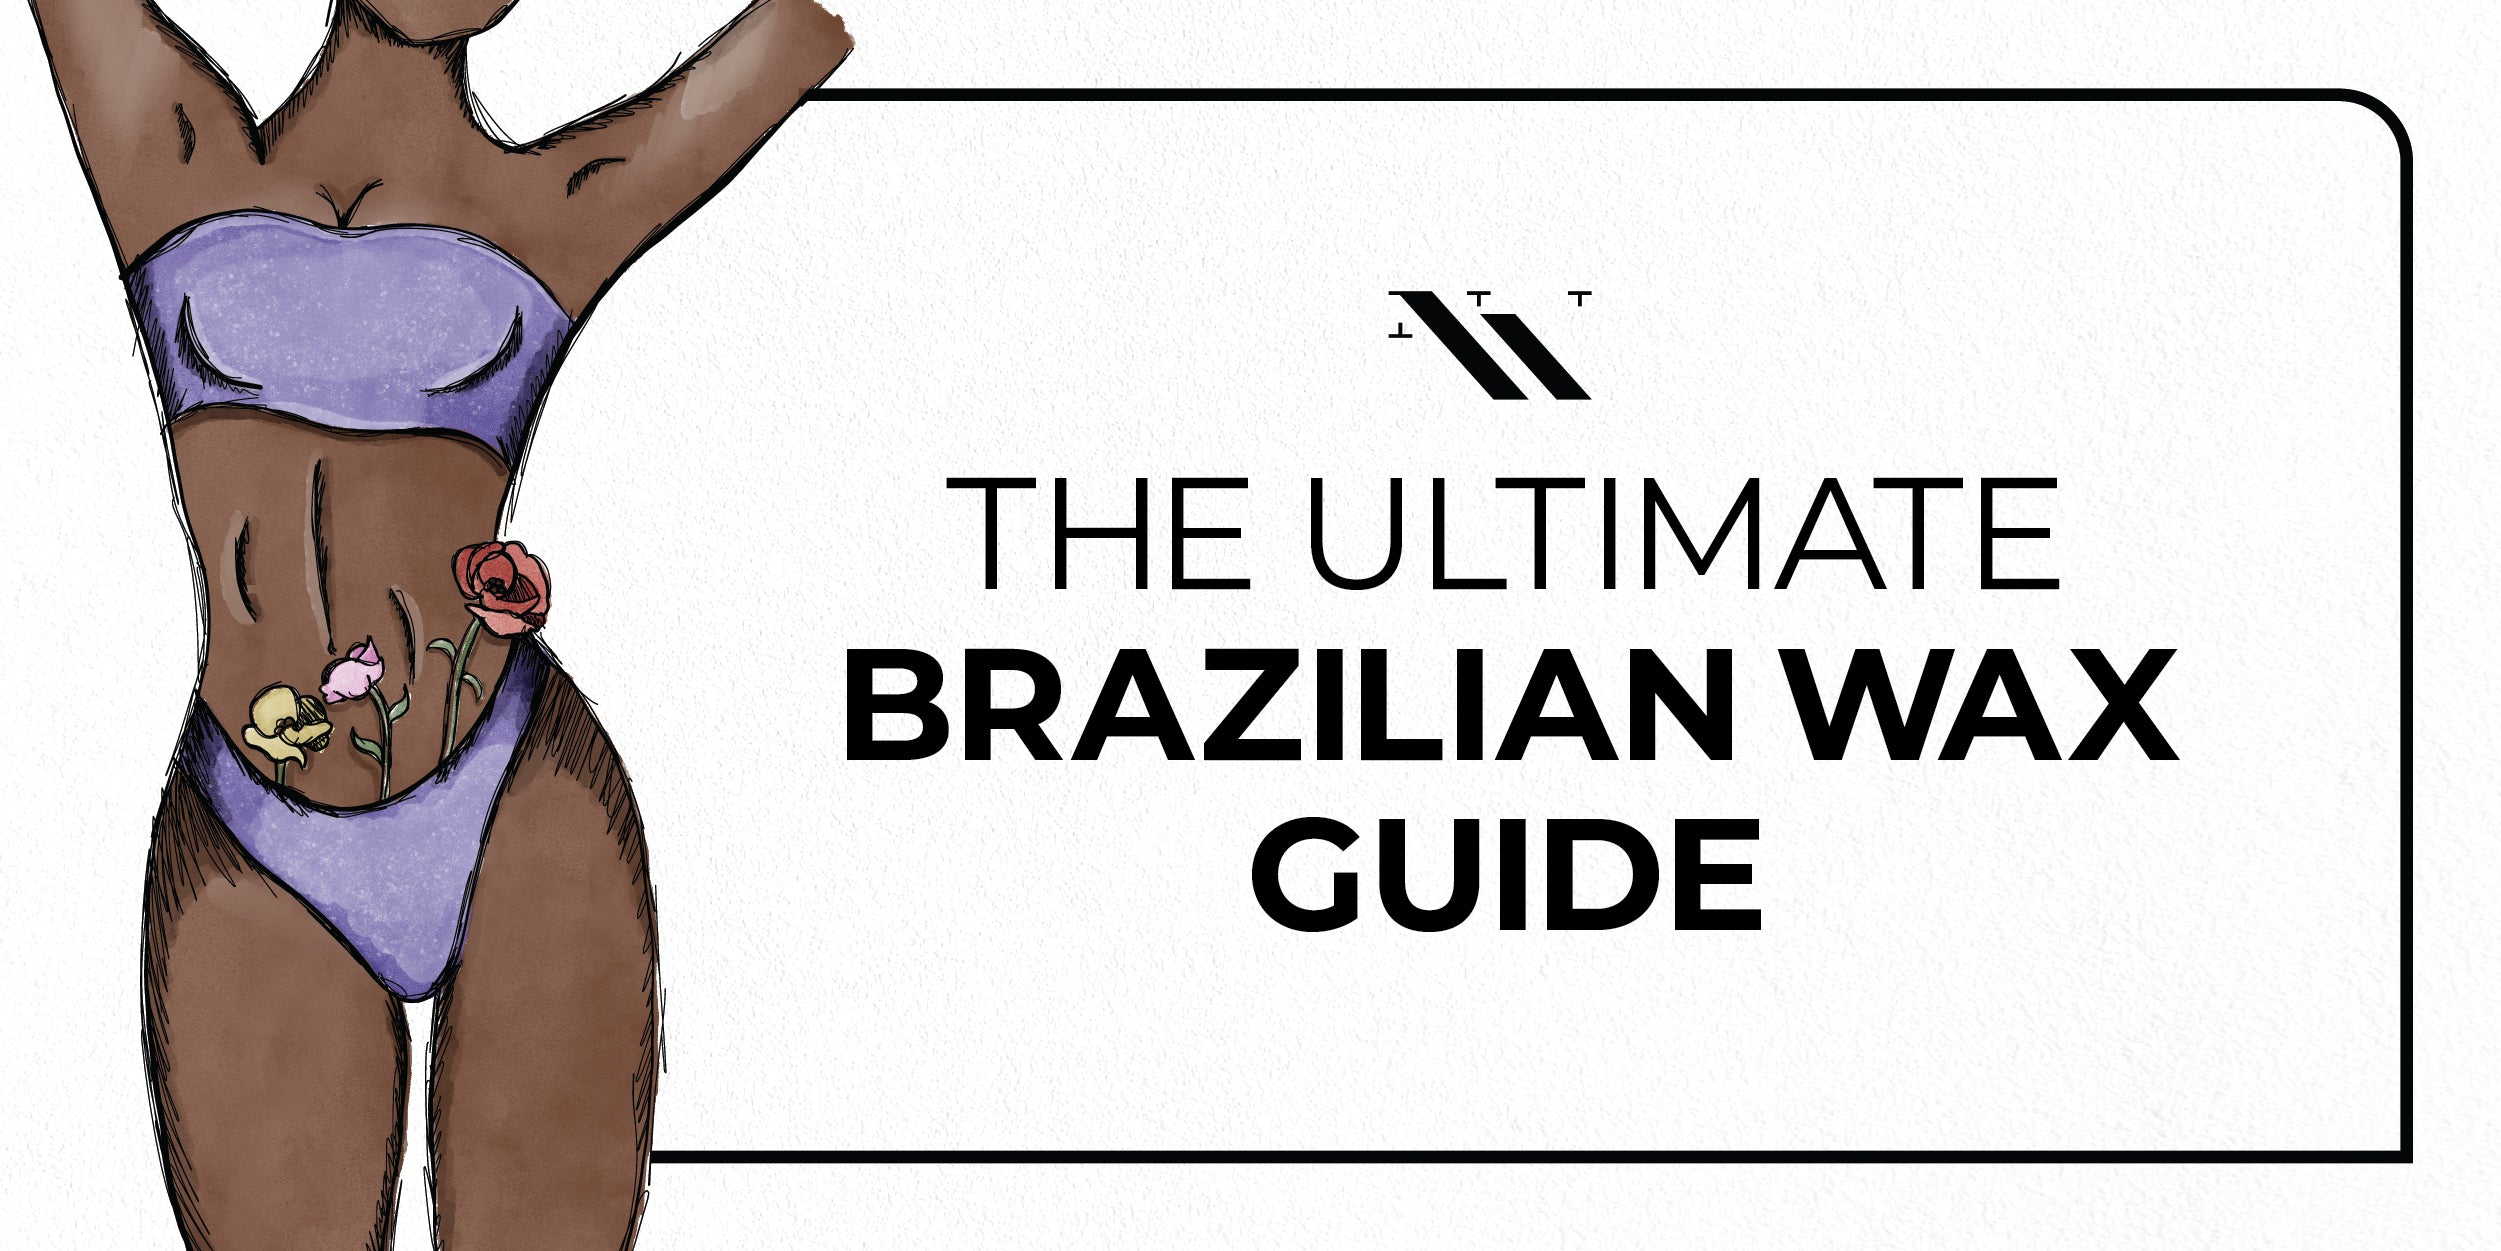 aderemi ojo recommends Getting A Brazilian Wax For The First Time Video